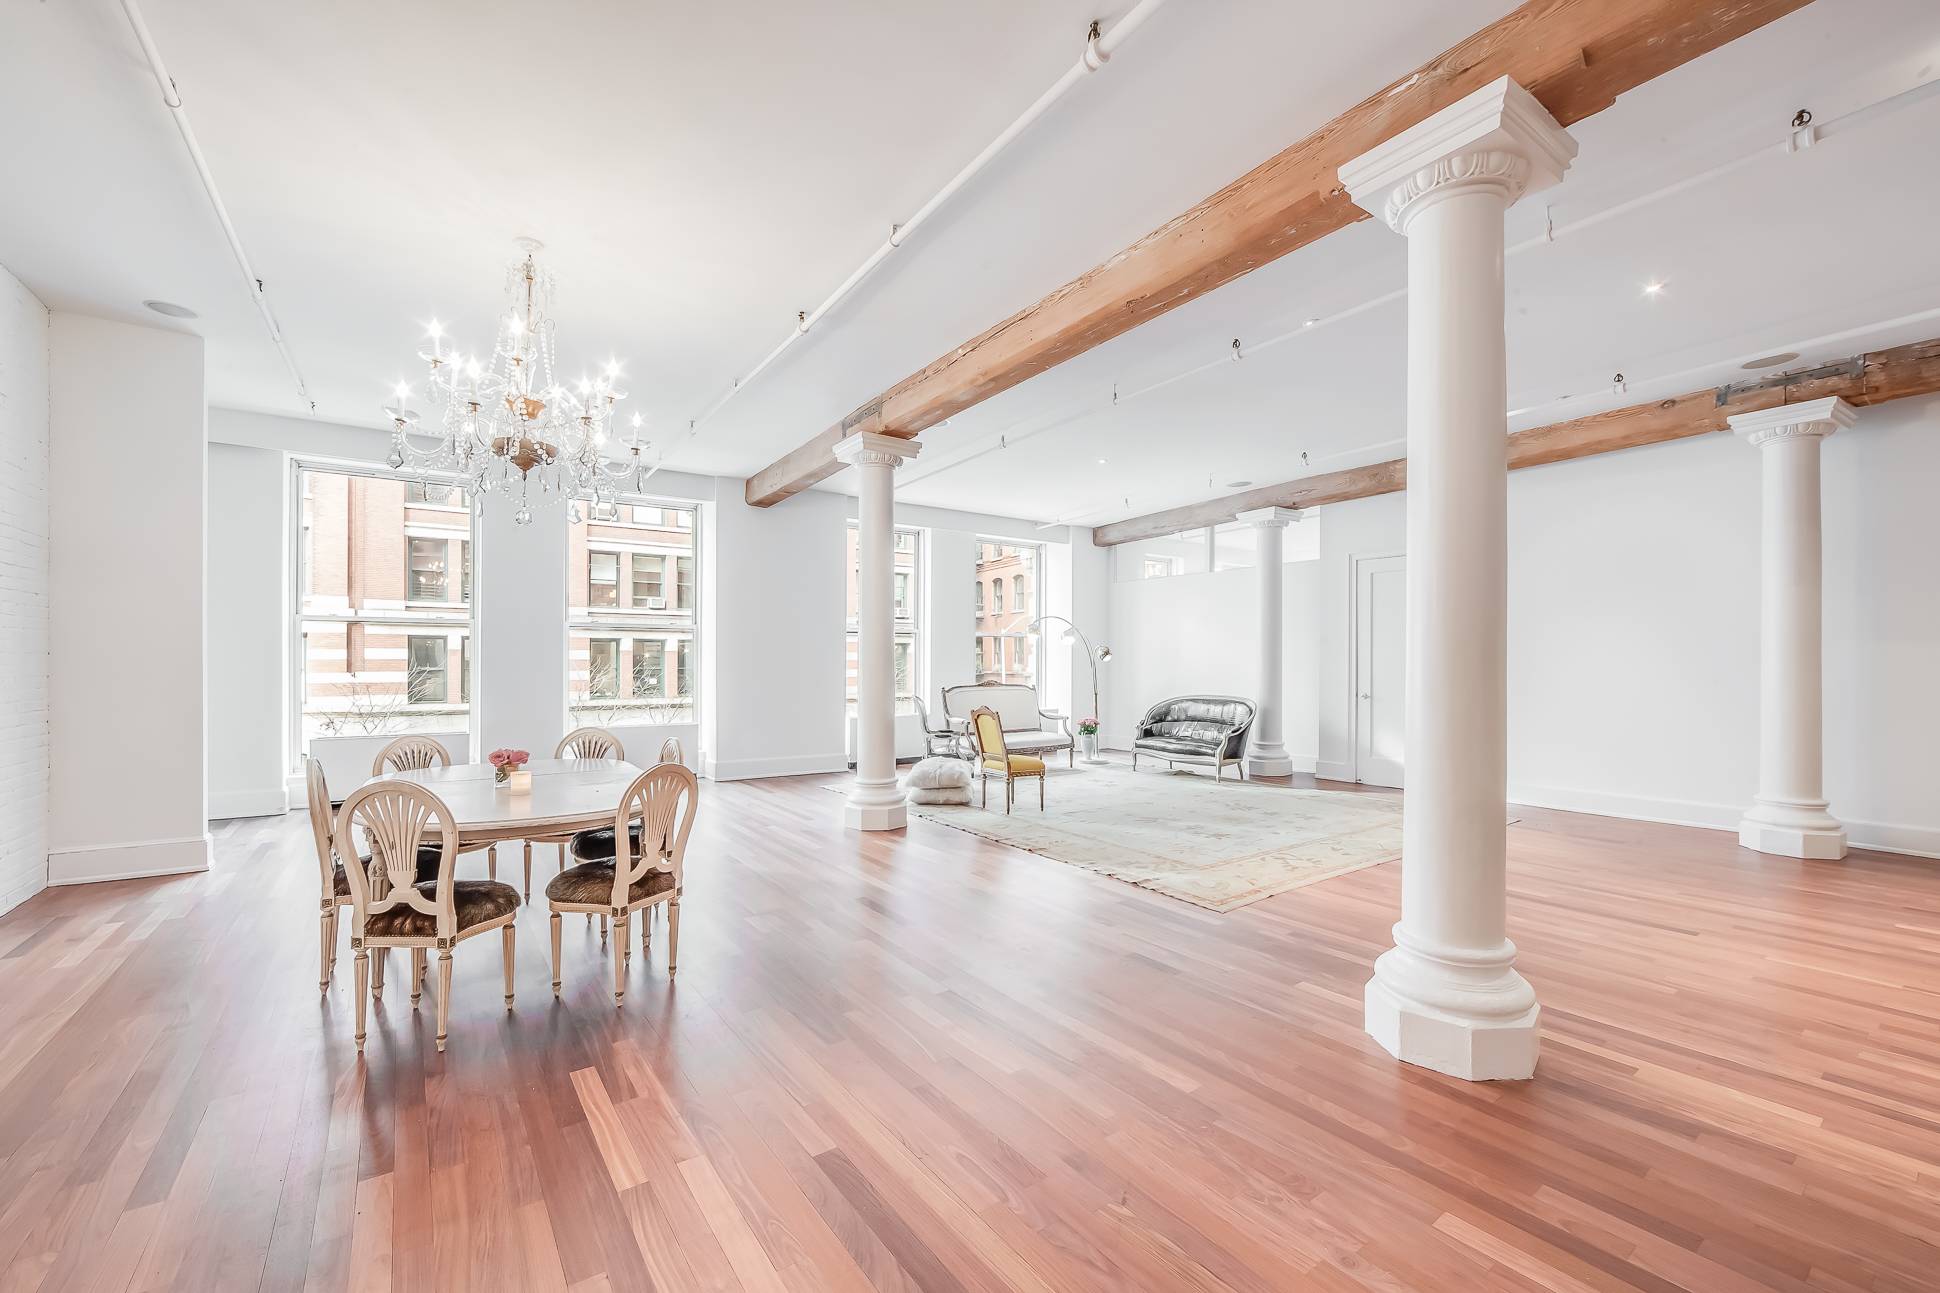 TIMELESS & CHIC SOHO LOFT 285 LAFAYETTE FOUR BEDROOM + LIBRARY FURNISHED SHORT or LONG TERM OFFERING